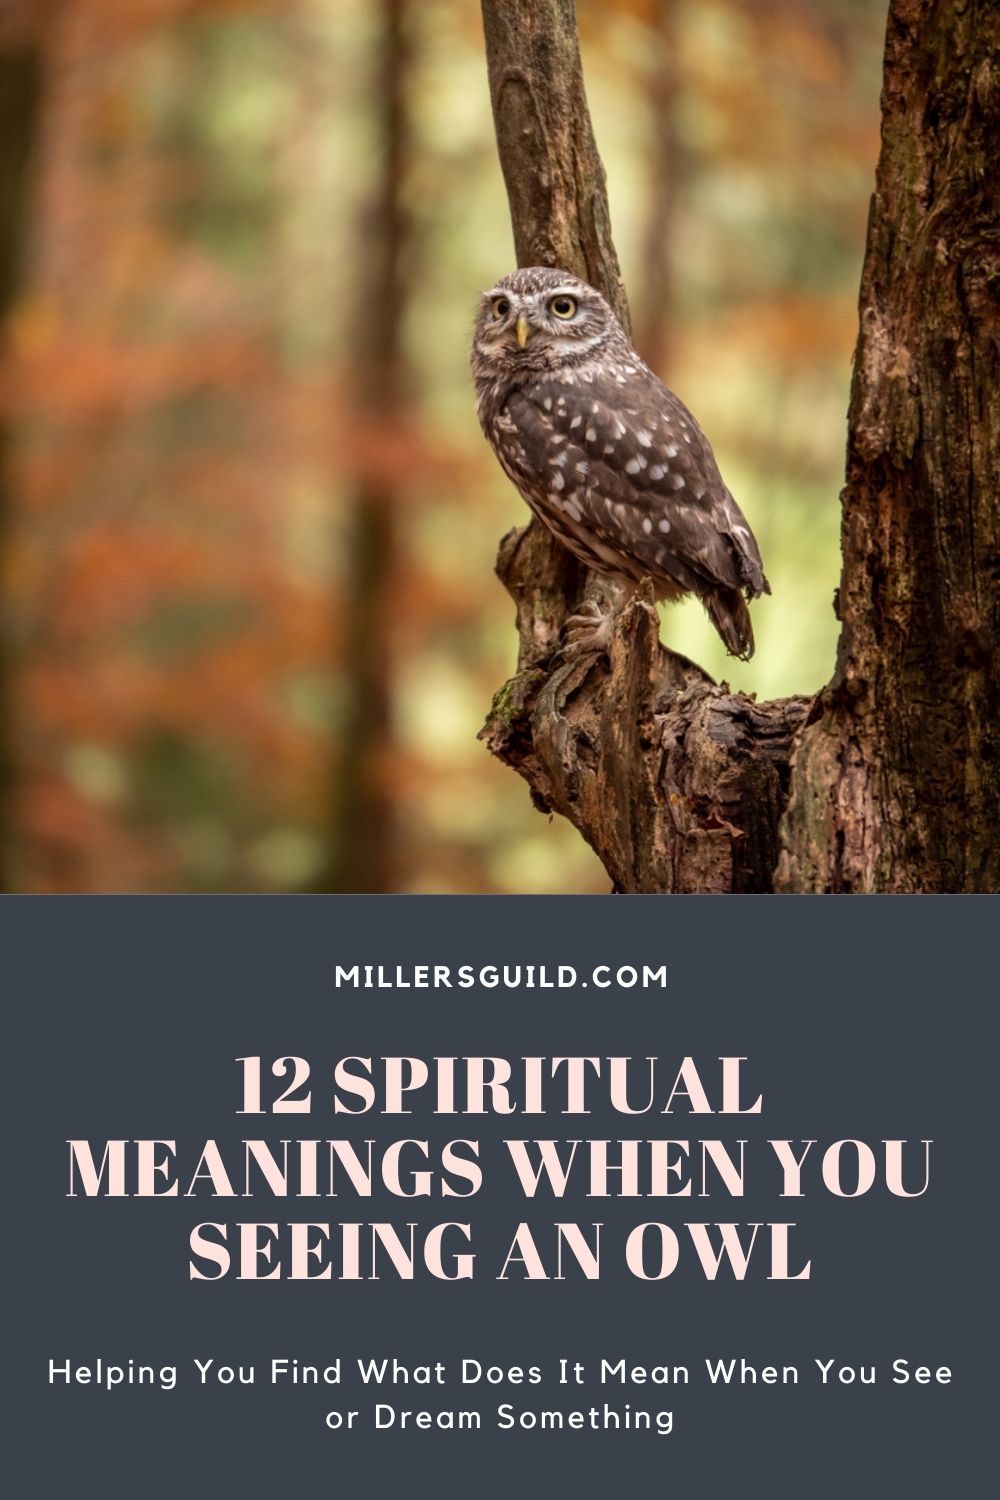 12 Spiritual Meanings When You Seeing an Owl